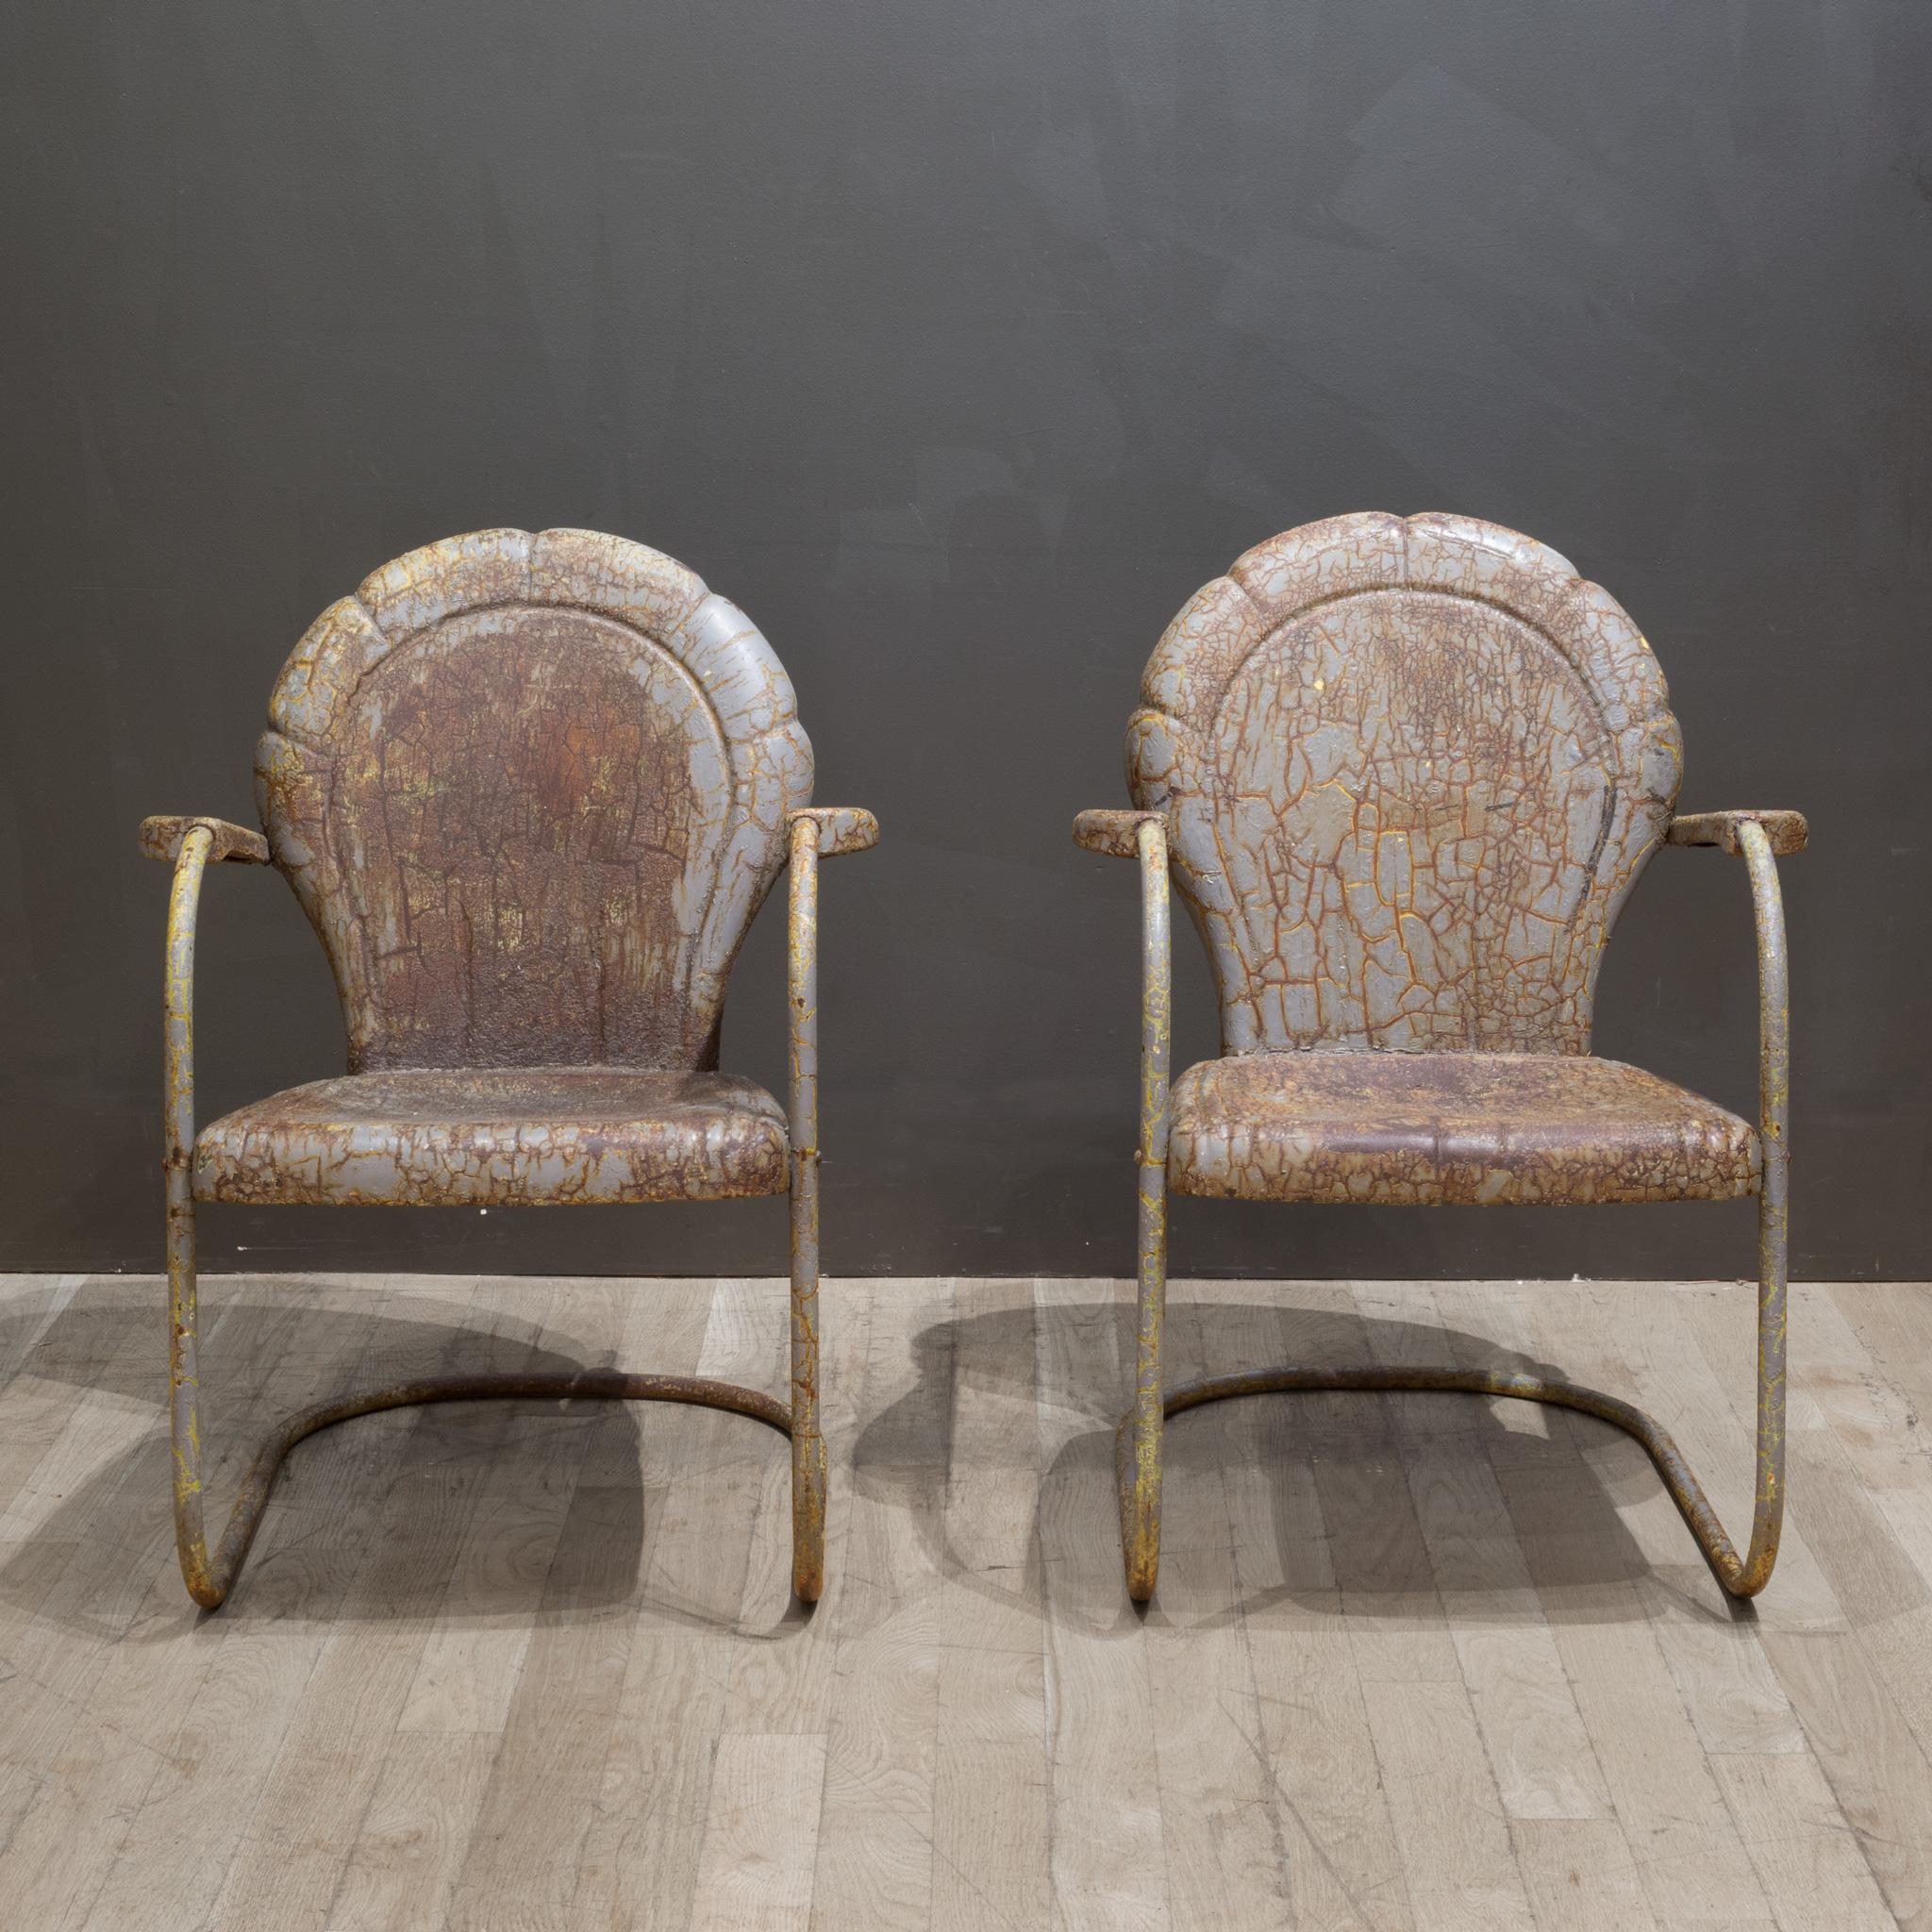 20th Century Mid-century Distressed Metal Patio Clam Shell Chairs c.1950